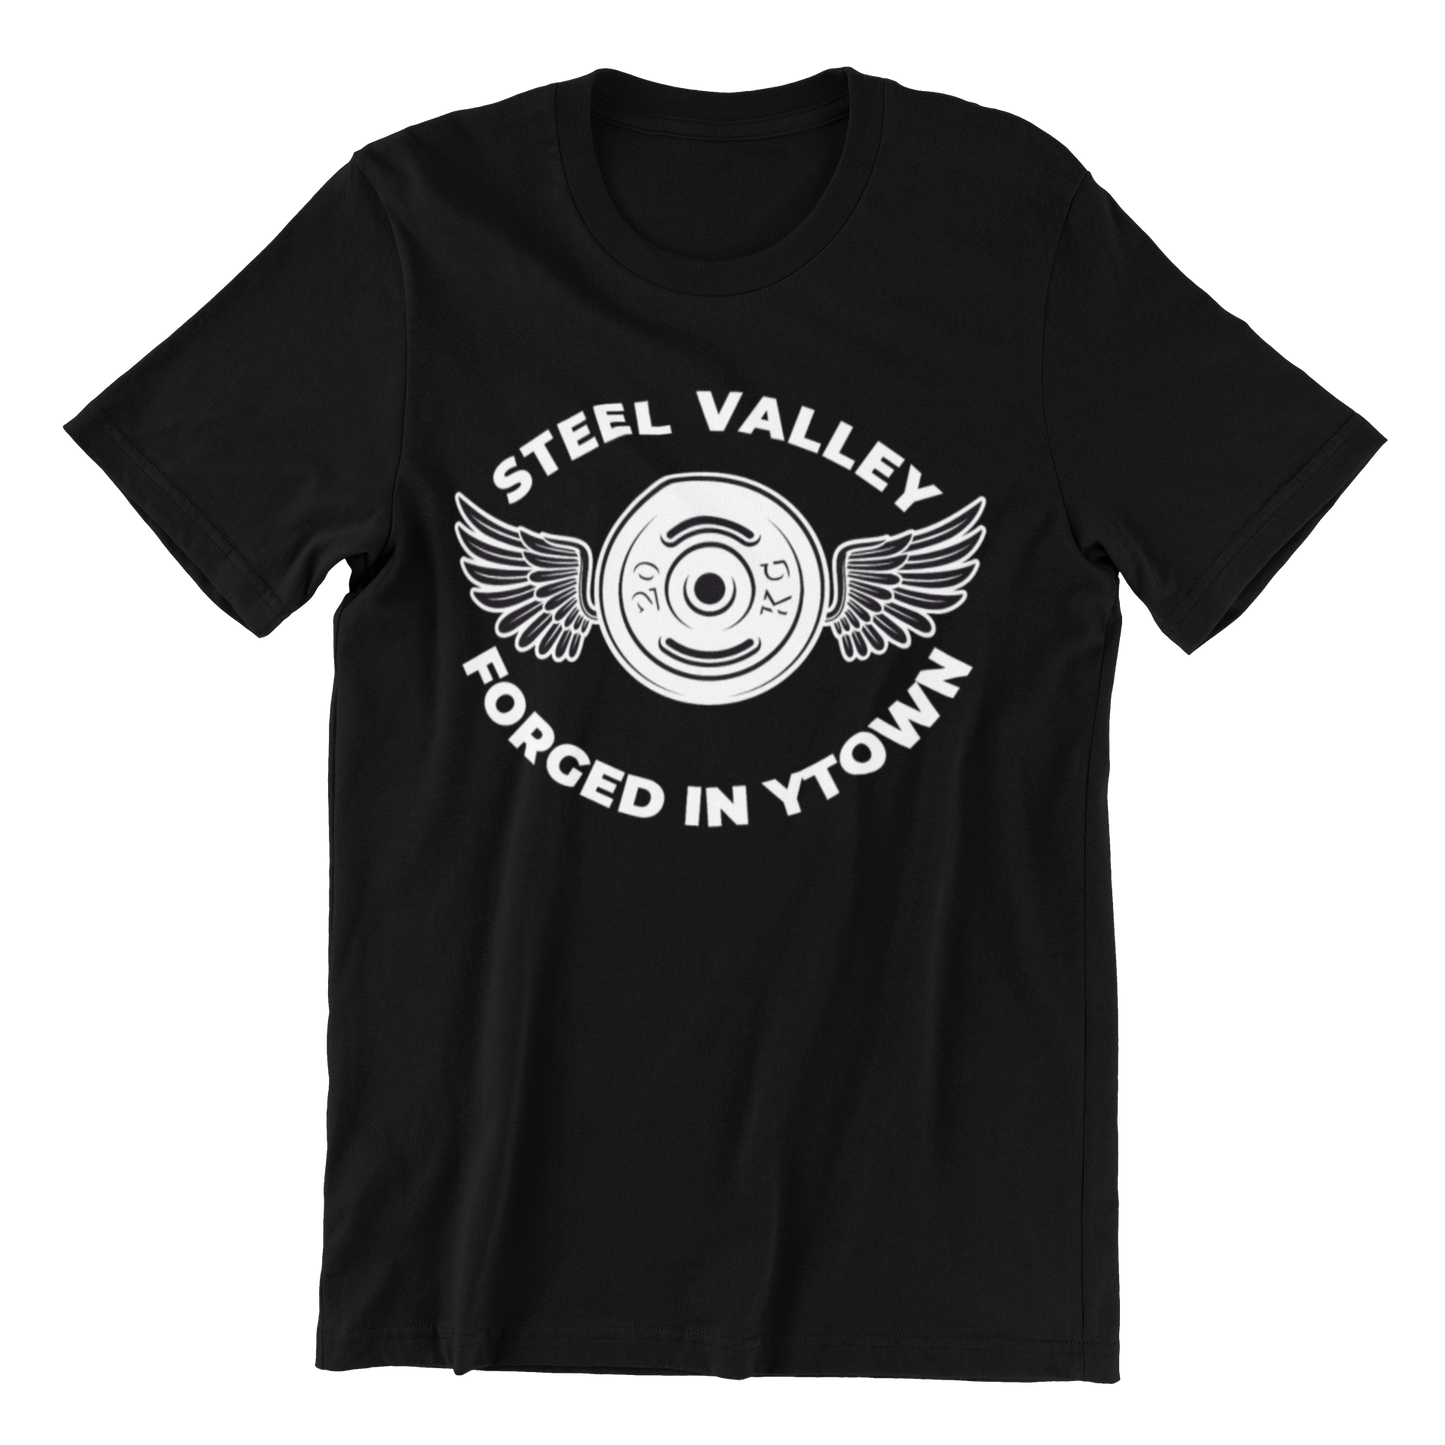 Strong Steel Valley T-shirt